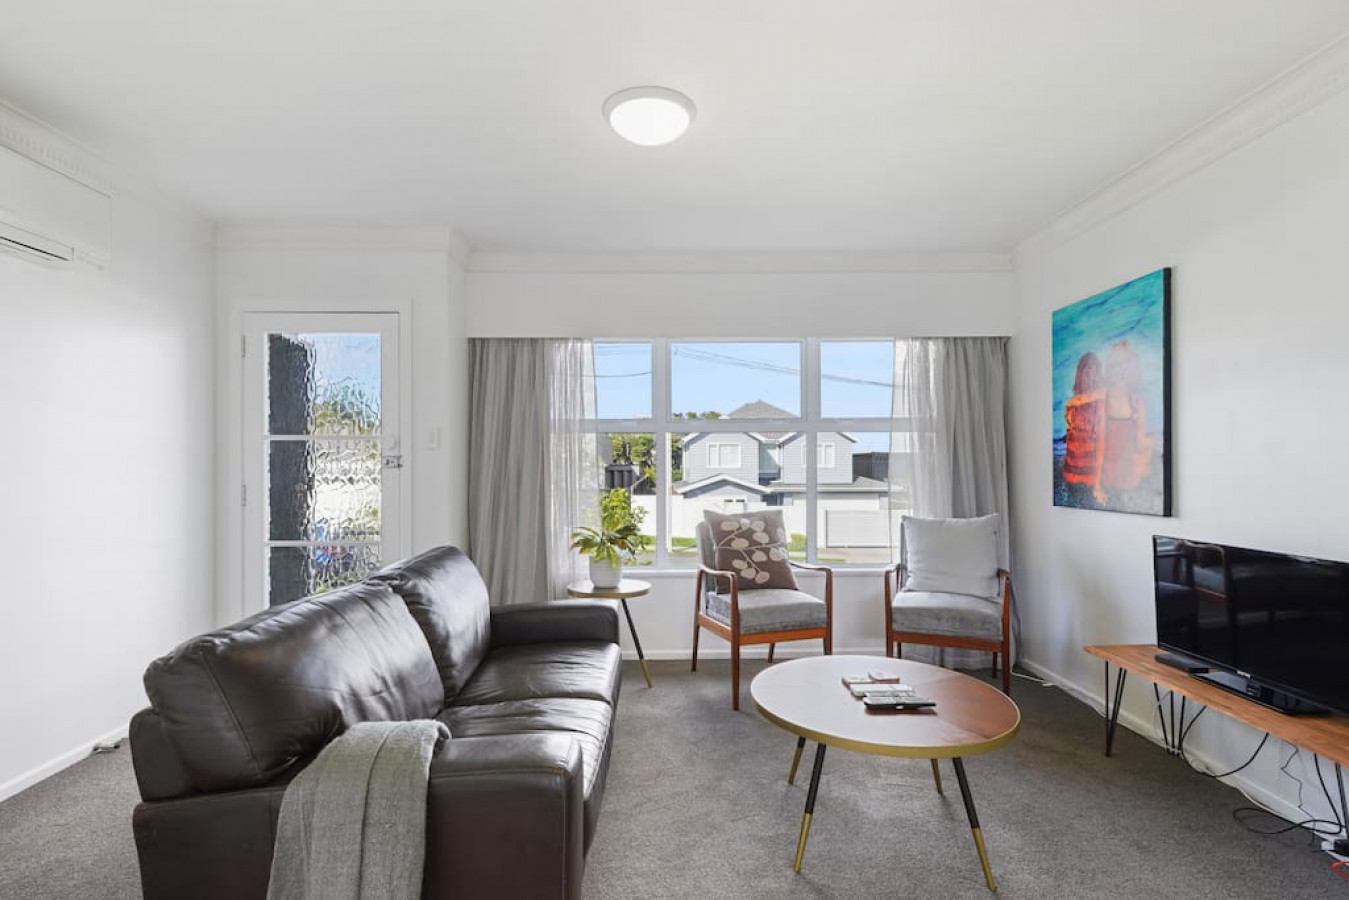 Property Image 1 - Renovated Two Bedroom Apartment with Free Parking and Walking Distance to Lake Pupuke